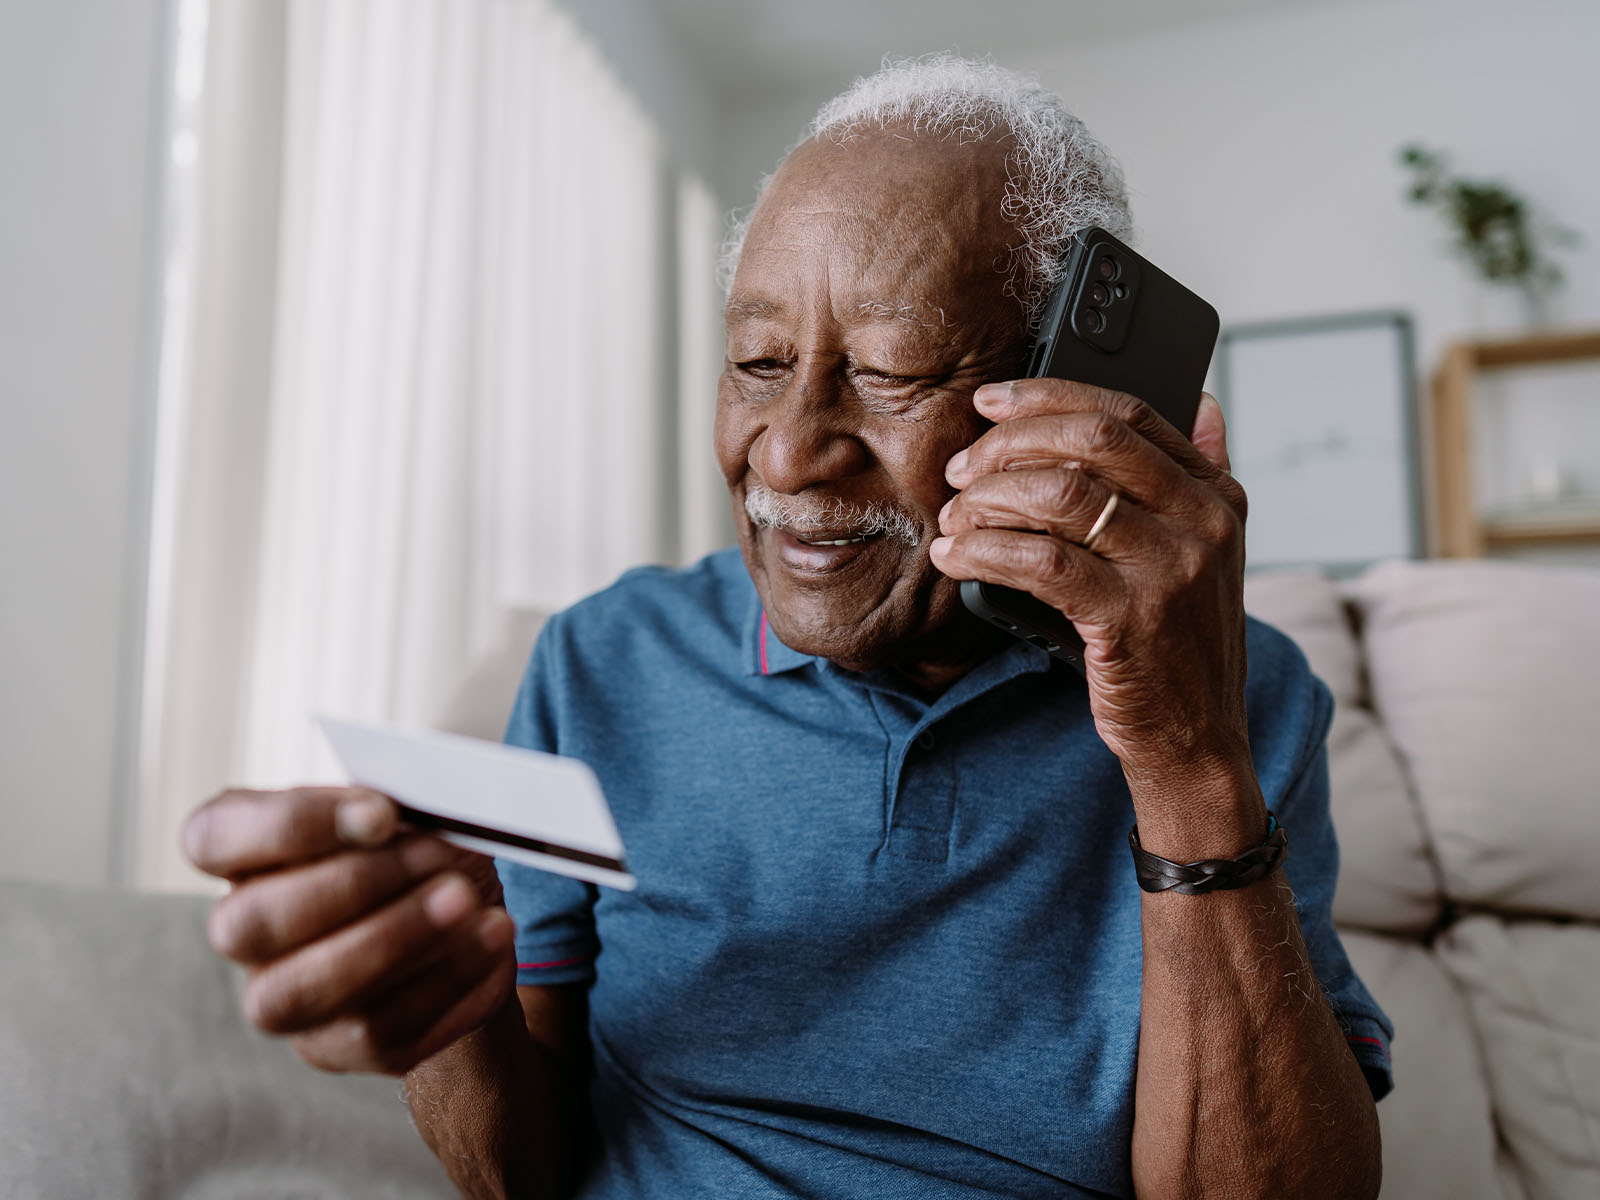 Senior man smiling and sitting on couch with card while on the phone